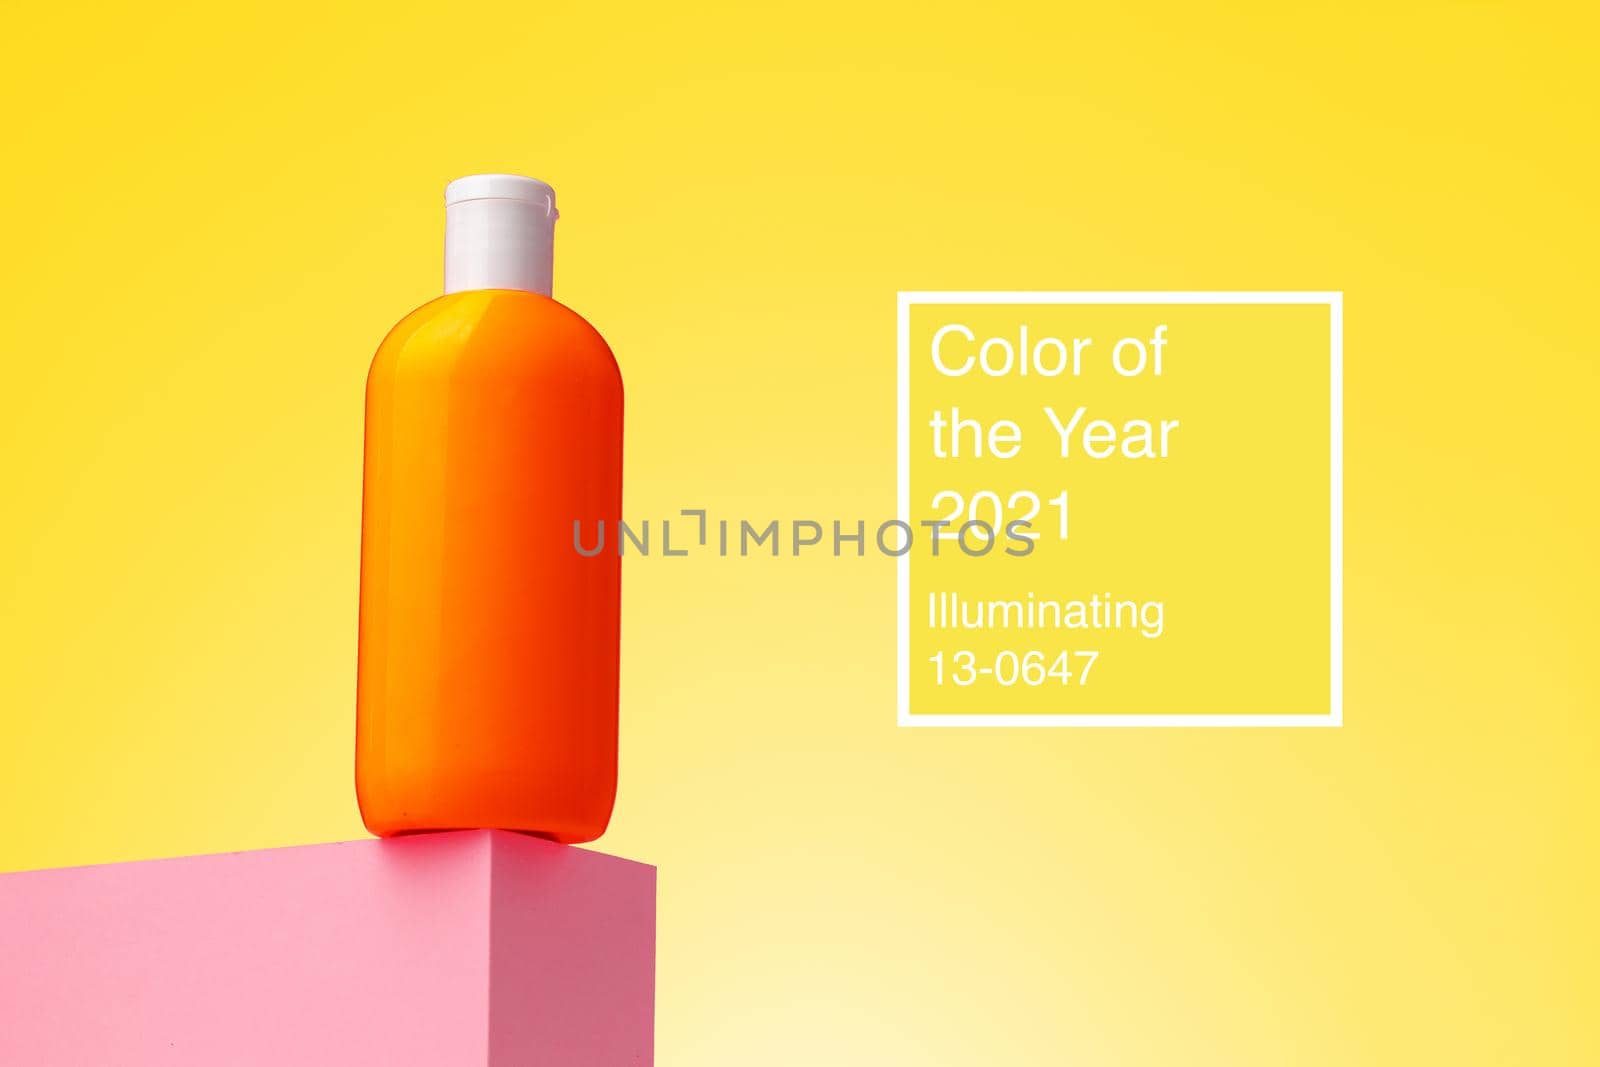 Skincare beauty product container against Illuminating yellow background , color of year 2021